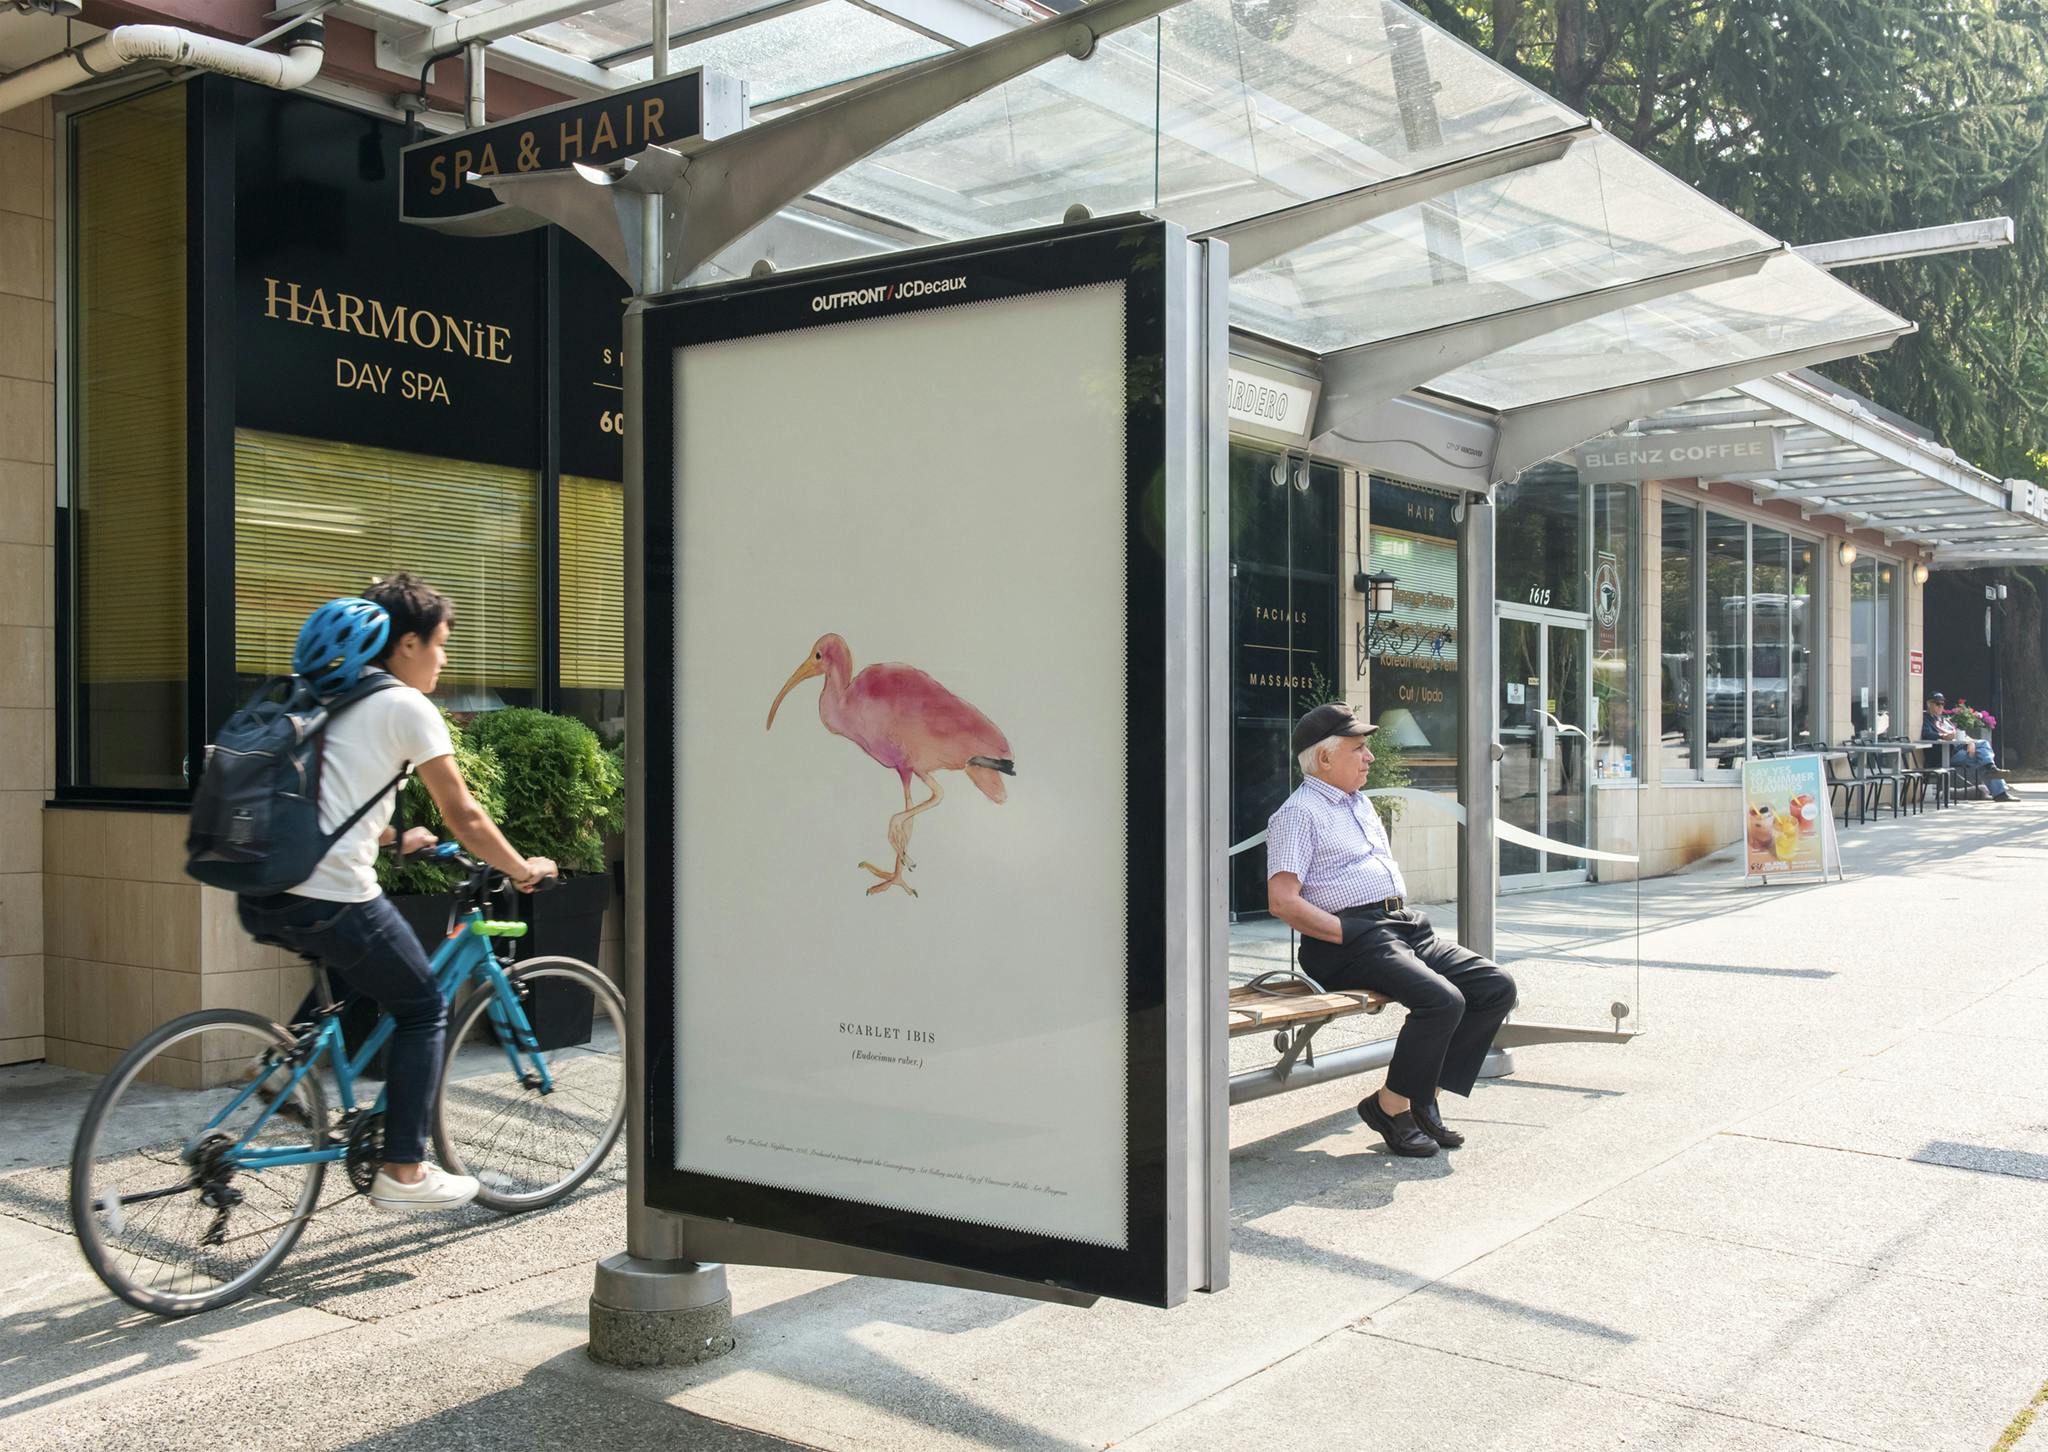 An image of a bus shelter with a person biking past and another sitting in the shelter. A large-scale watercolour print of a Scarlet Ibis is installed in the shelter, in place of an advertisement. 